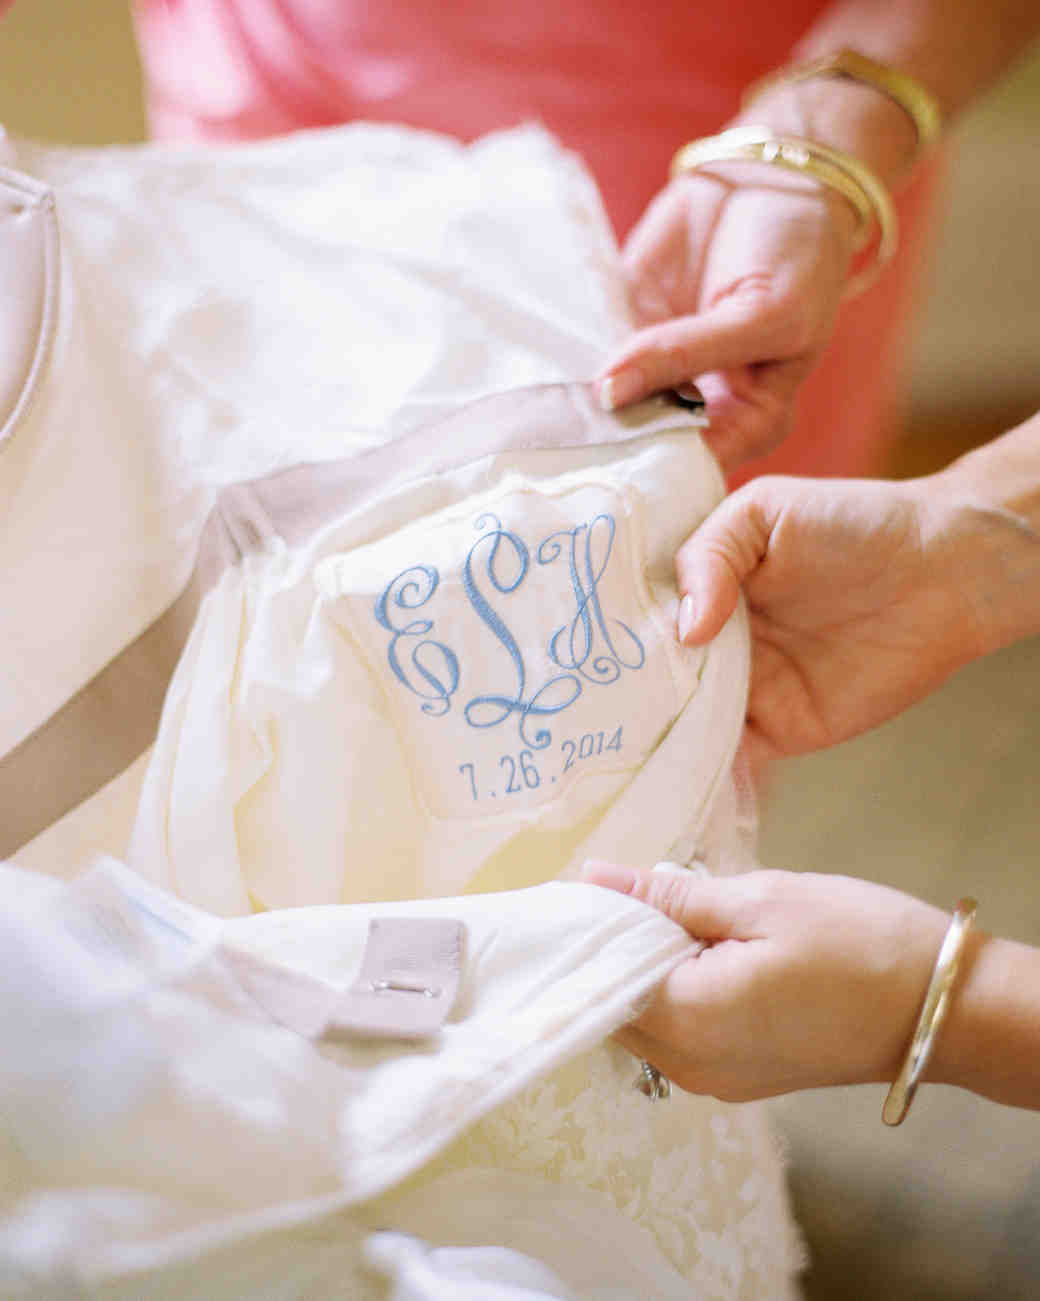 embroidery Beaumont TX, wedding embroidery Beaumont TX, SETX embroidery, wedding embroidery SETX, wedding vendor Beaumont TX, wedding ideas Beaumont TX